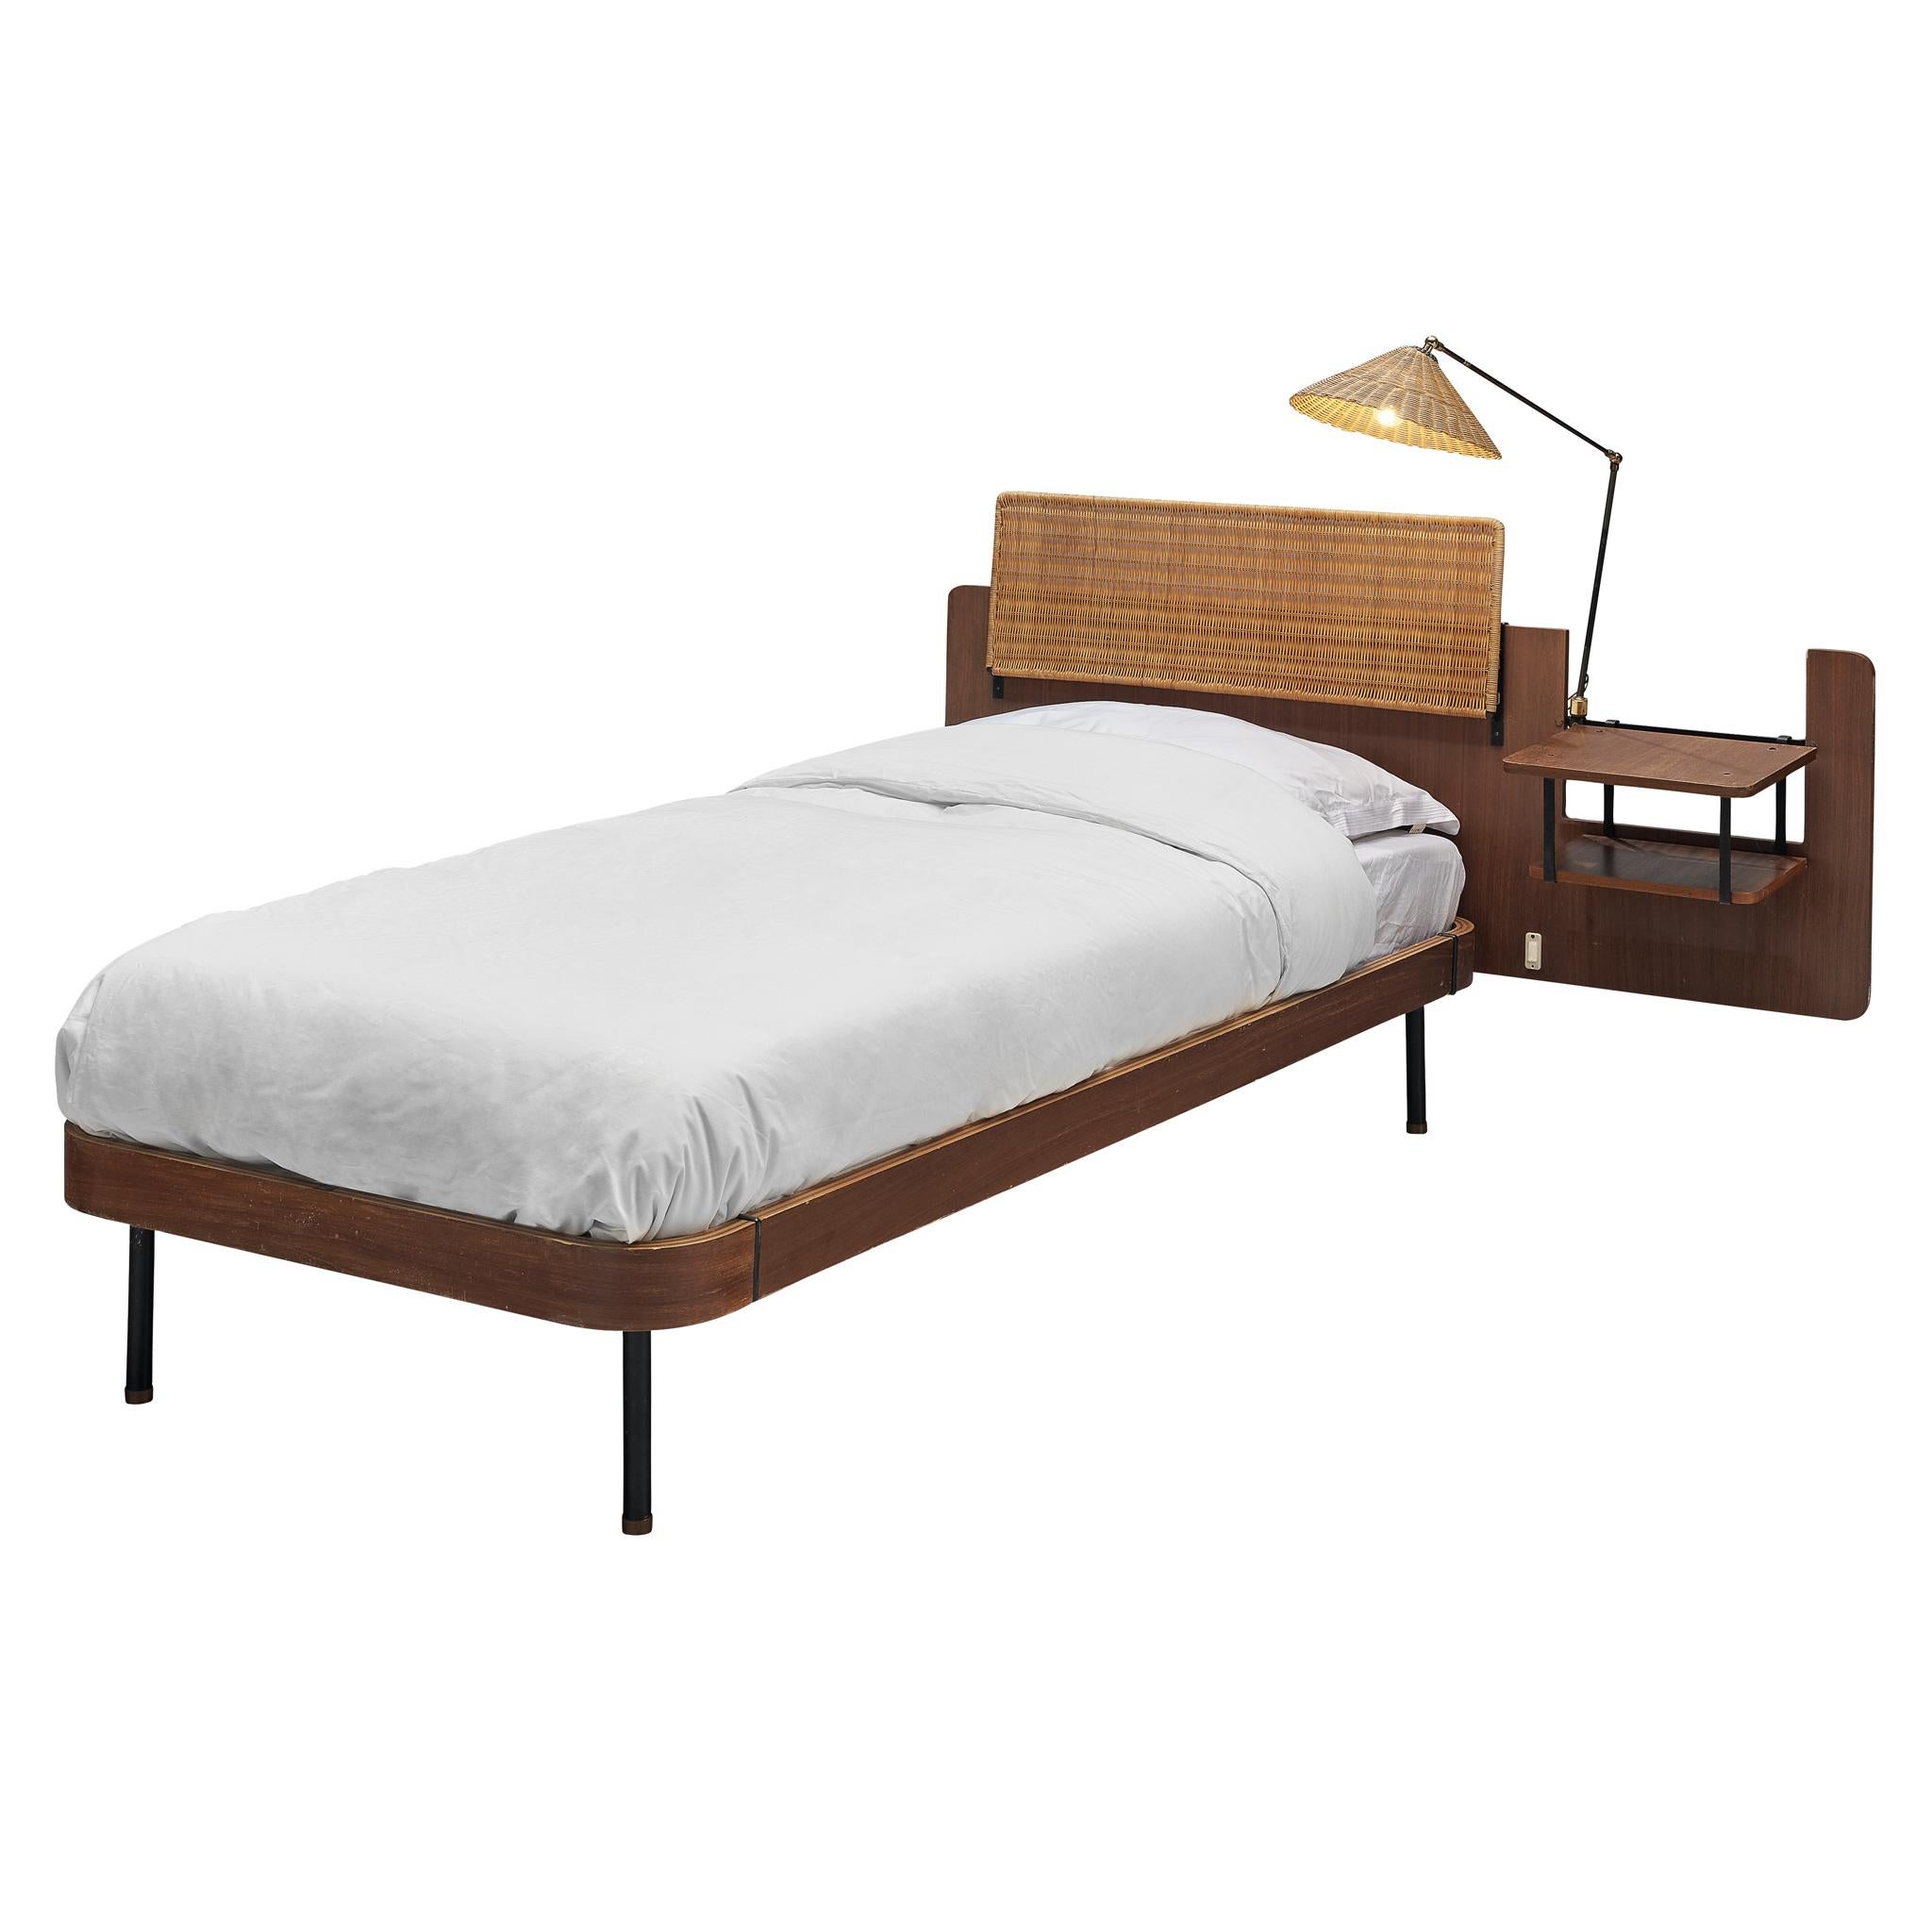 Italian Single Bed with Nightstand and Lamp